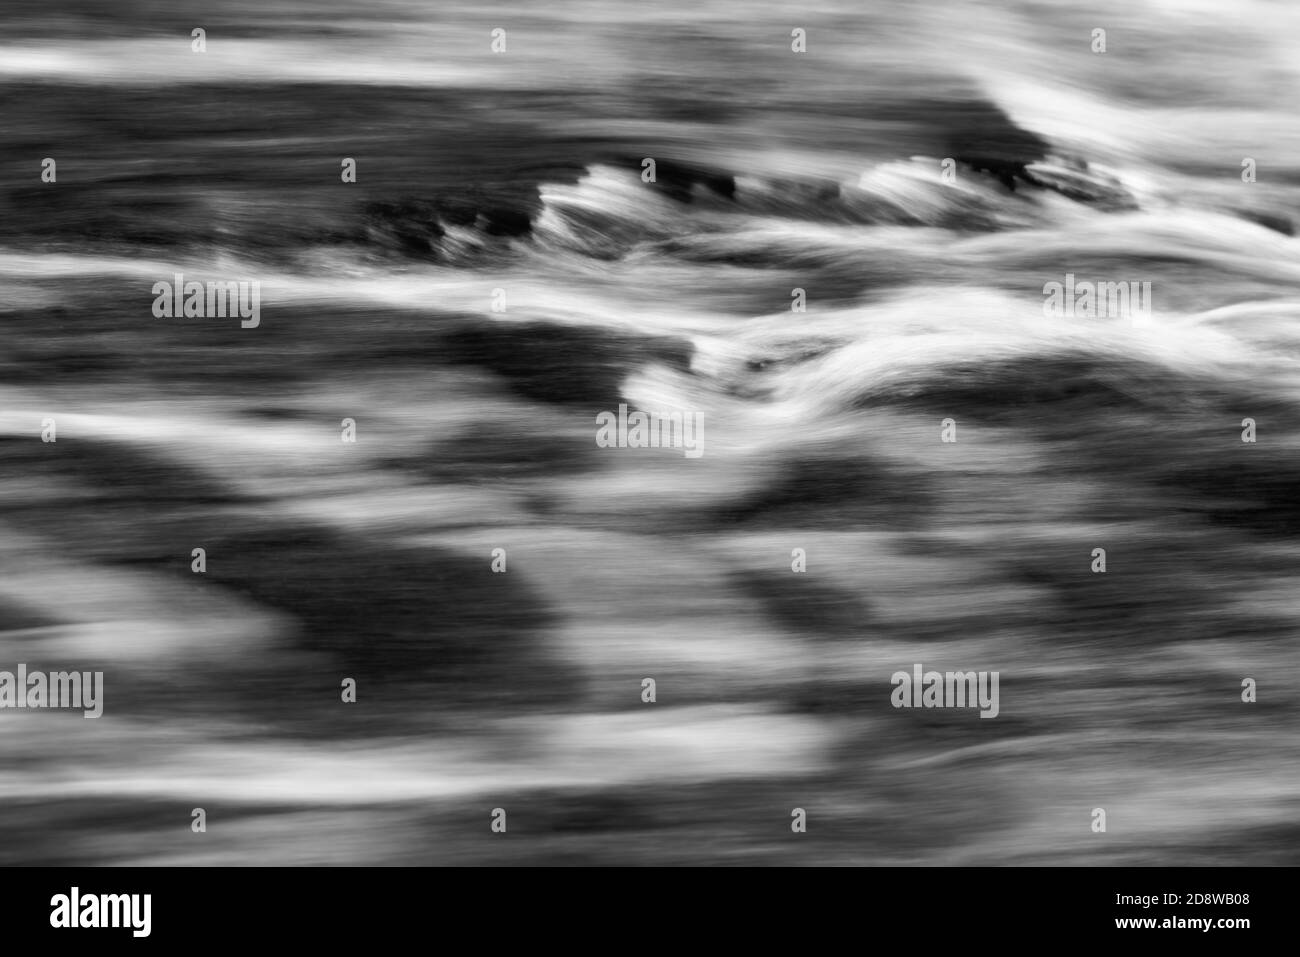 Detail view of flowing water of a small river, high-contrast black and white image, flowing structures, long time exposure Stock Photo